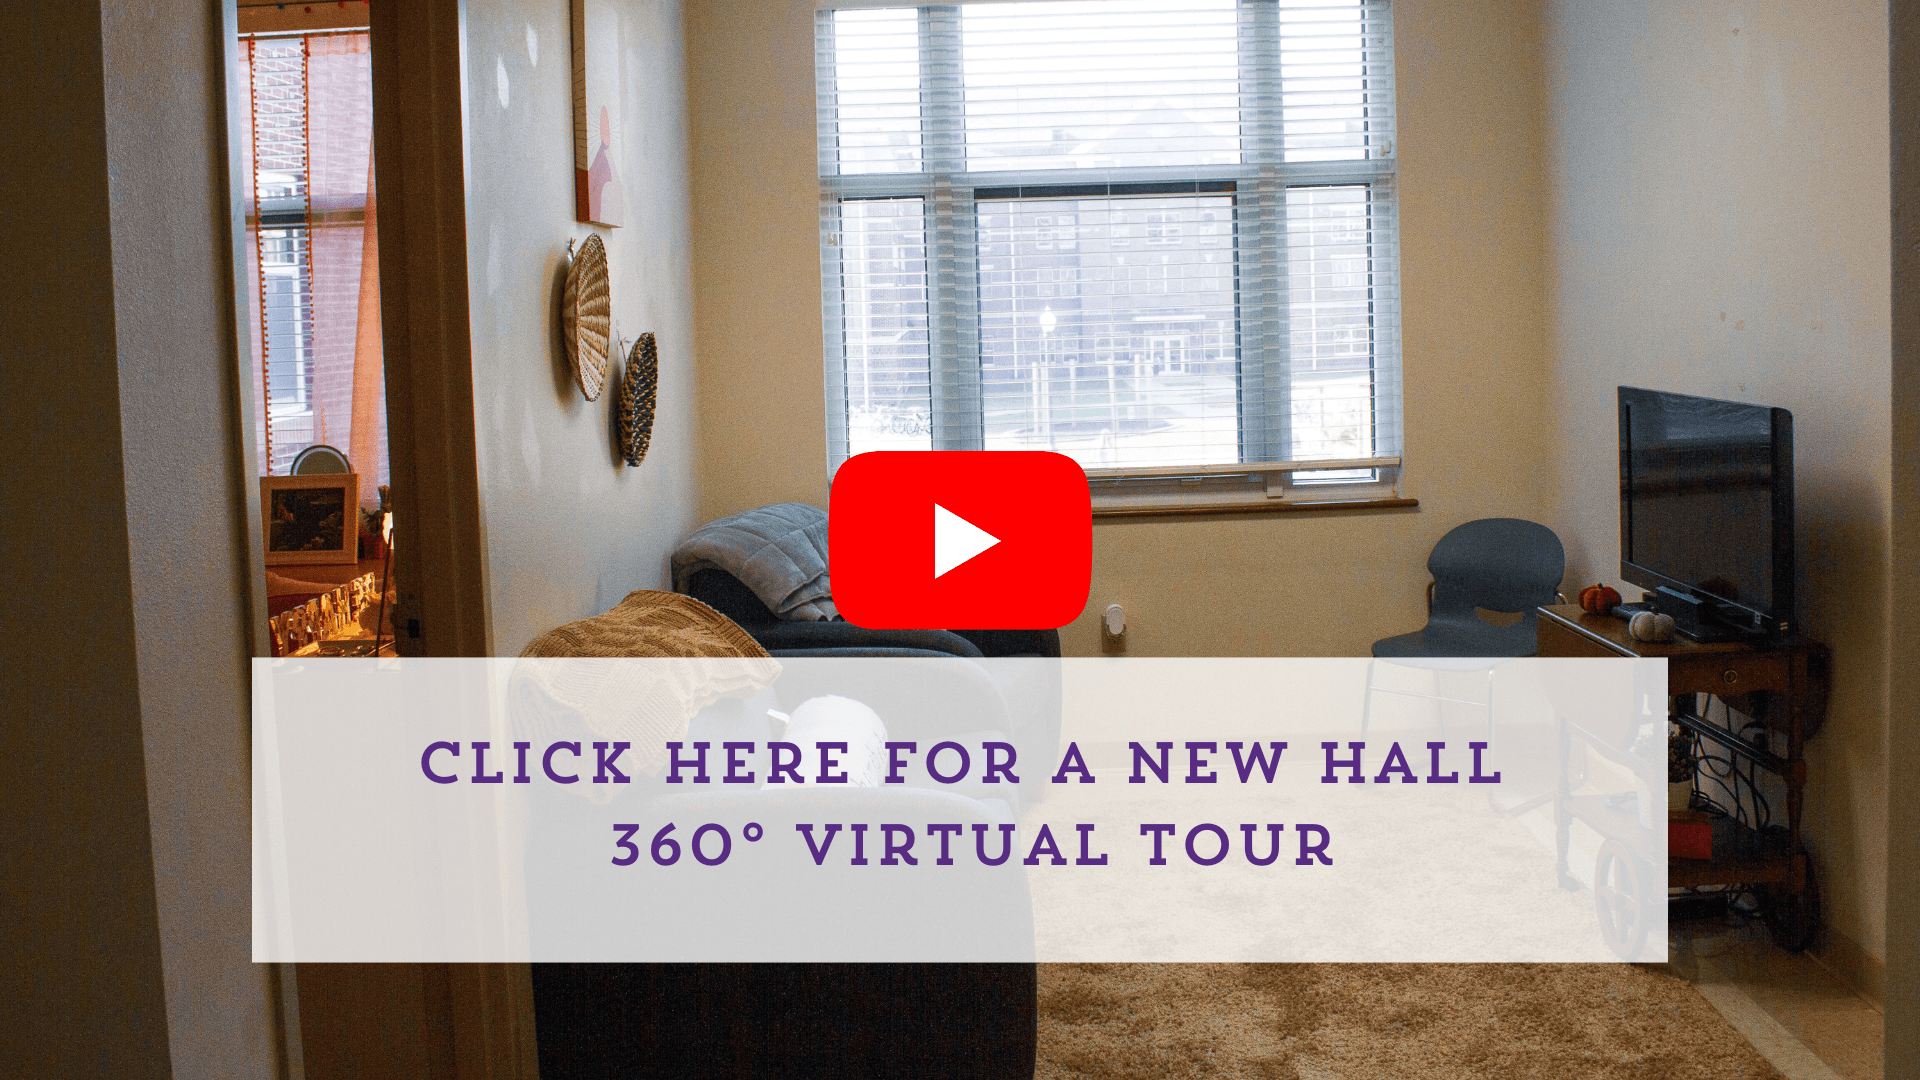 alt text: click here for a new hall 360 degree virtual tour